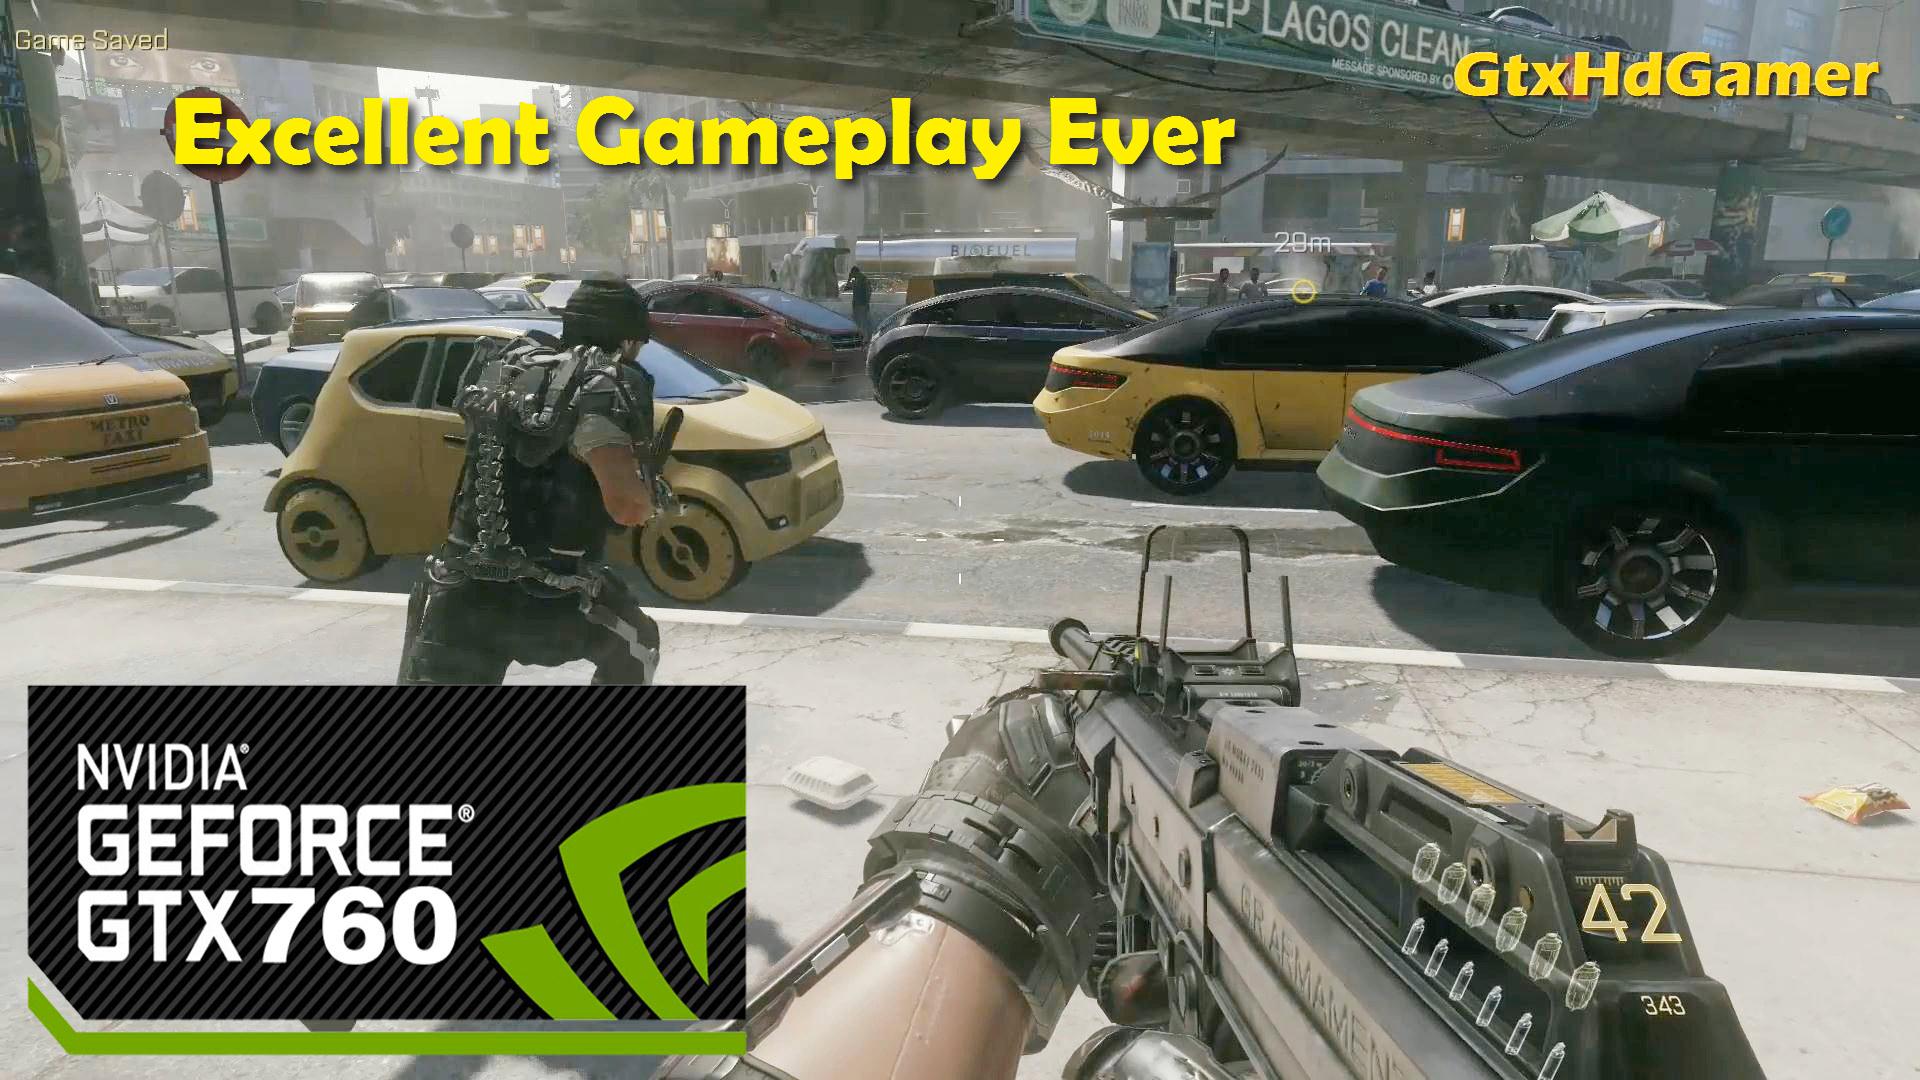 [COD] Advanced Warfare Action Gameplay on GTX 760 | Mission 3 Traffic | High Settings 1080p